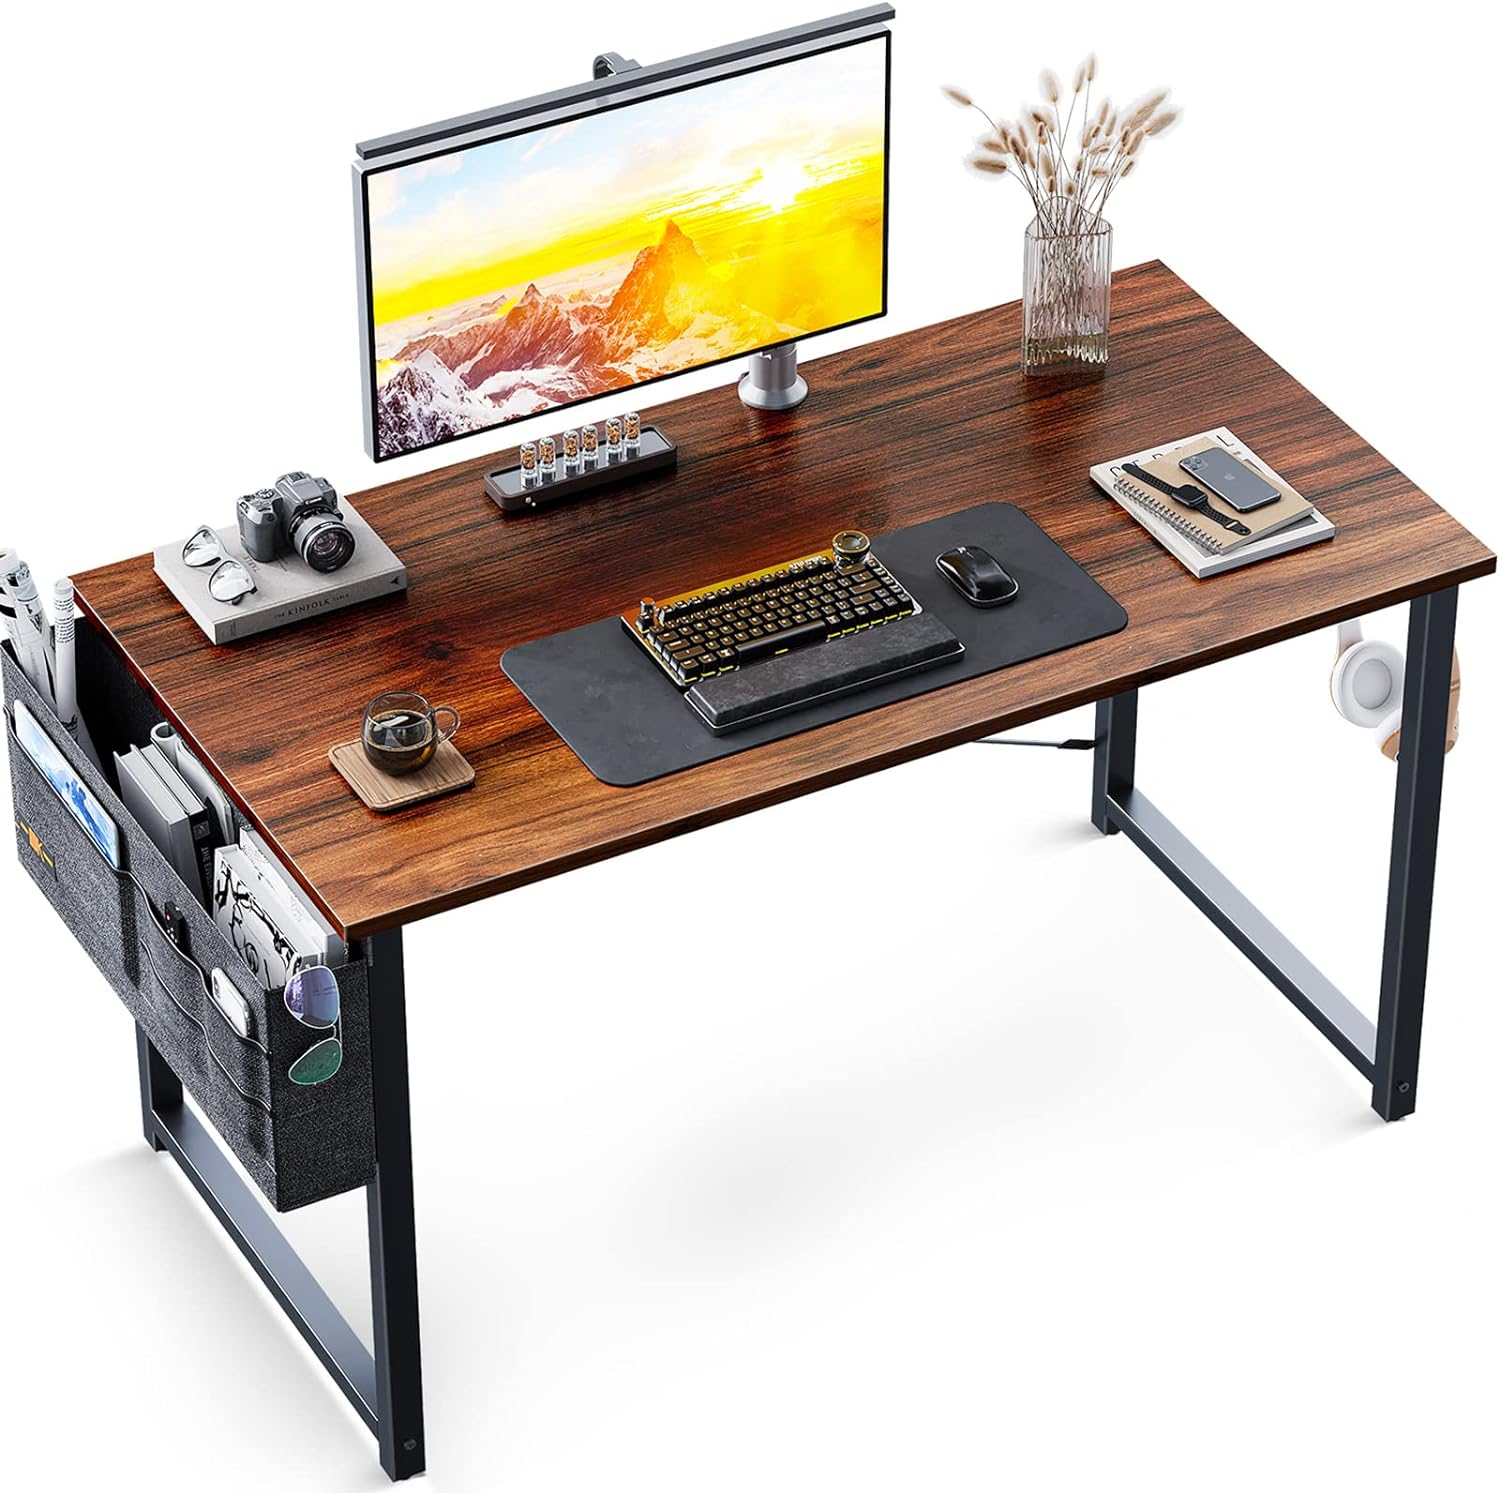 I recently purchased the ODK 63-inch Super Large Computer Writing Desk for my home office, and I am extremely pleased with my purchase. This desk offers a perfect blend of aesthetics, functionality, and convenience, making it an ideal choice for both gaming and professional work.Assembly:The assembly process was a breeze, taking me approximately 20 to 30 minutes to complete. The instructions provided were crystal clear, with parts well-marked using both letters and numbers. This made it easy to 